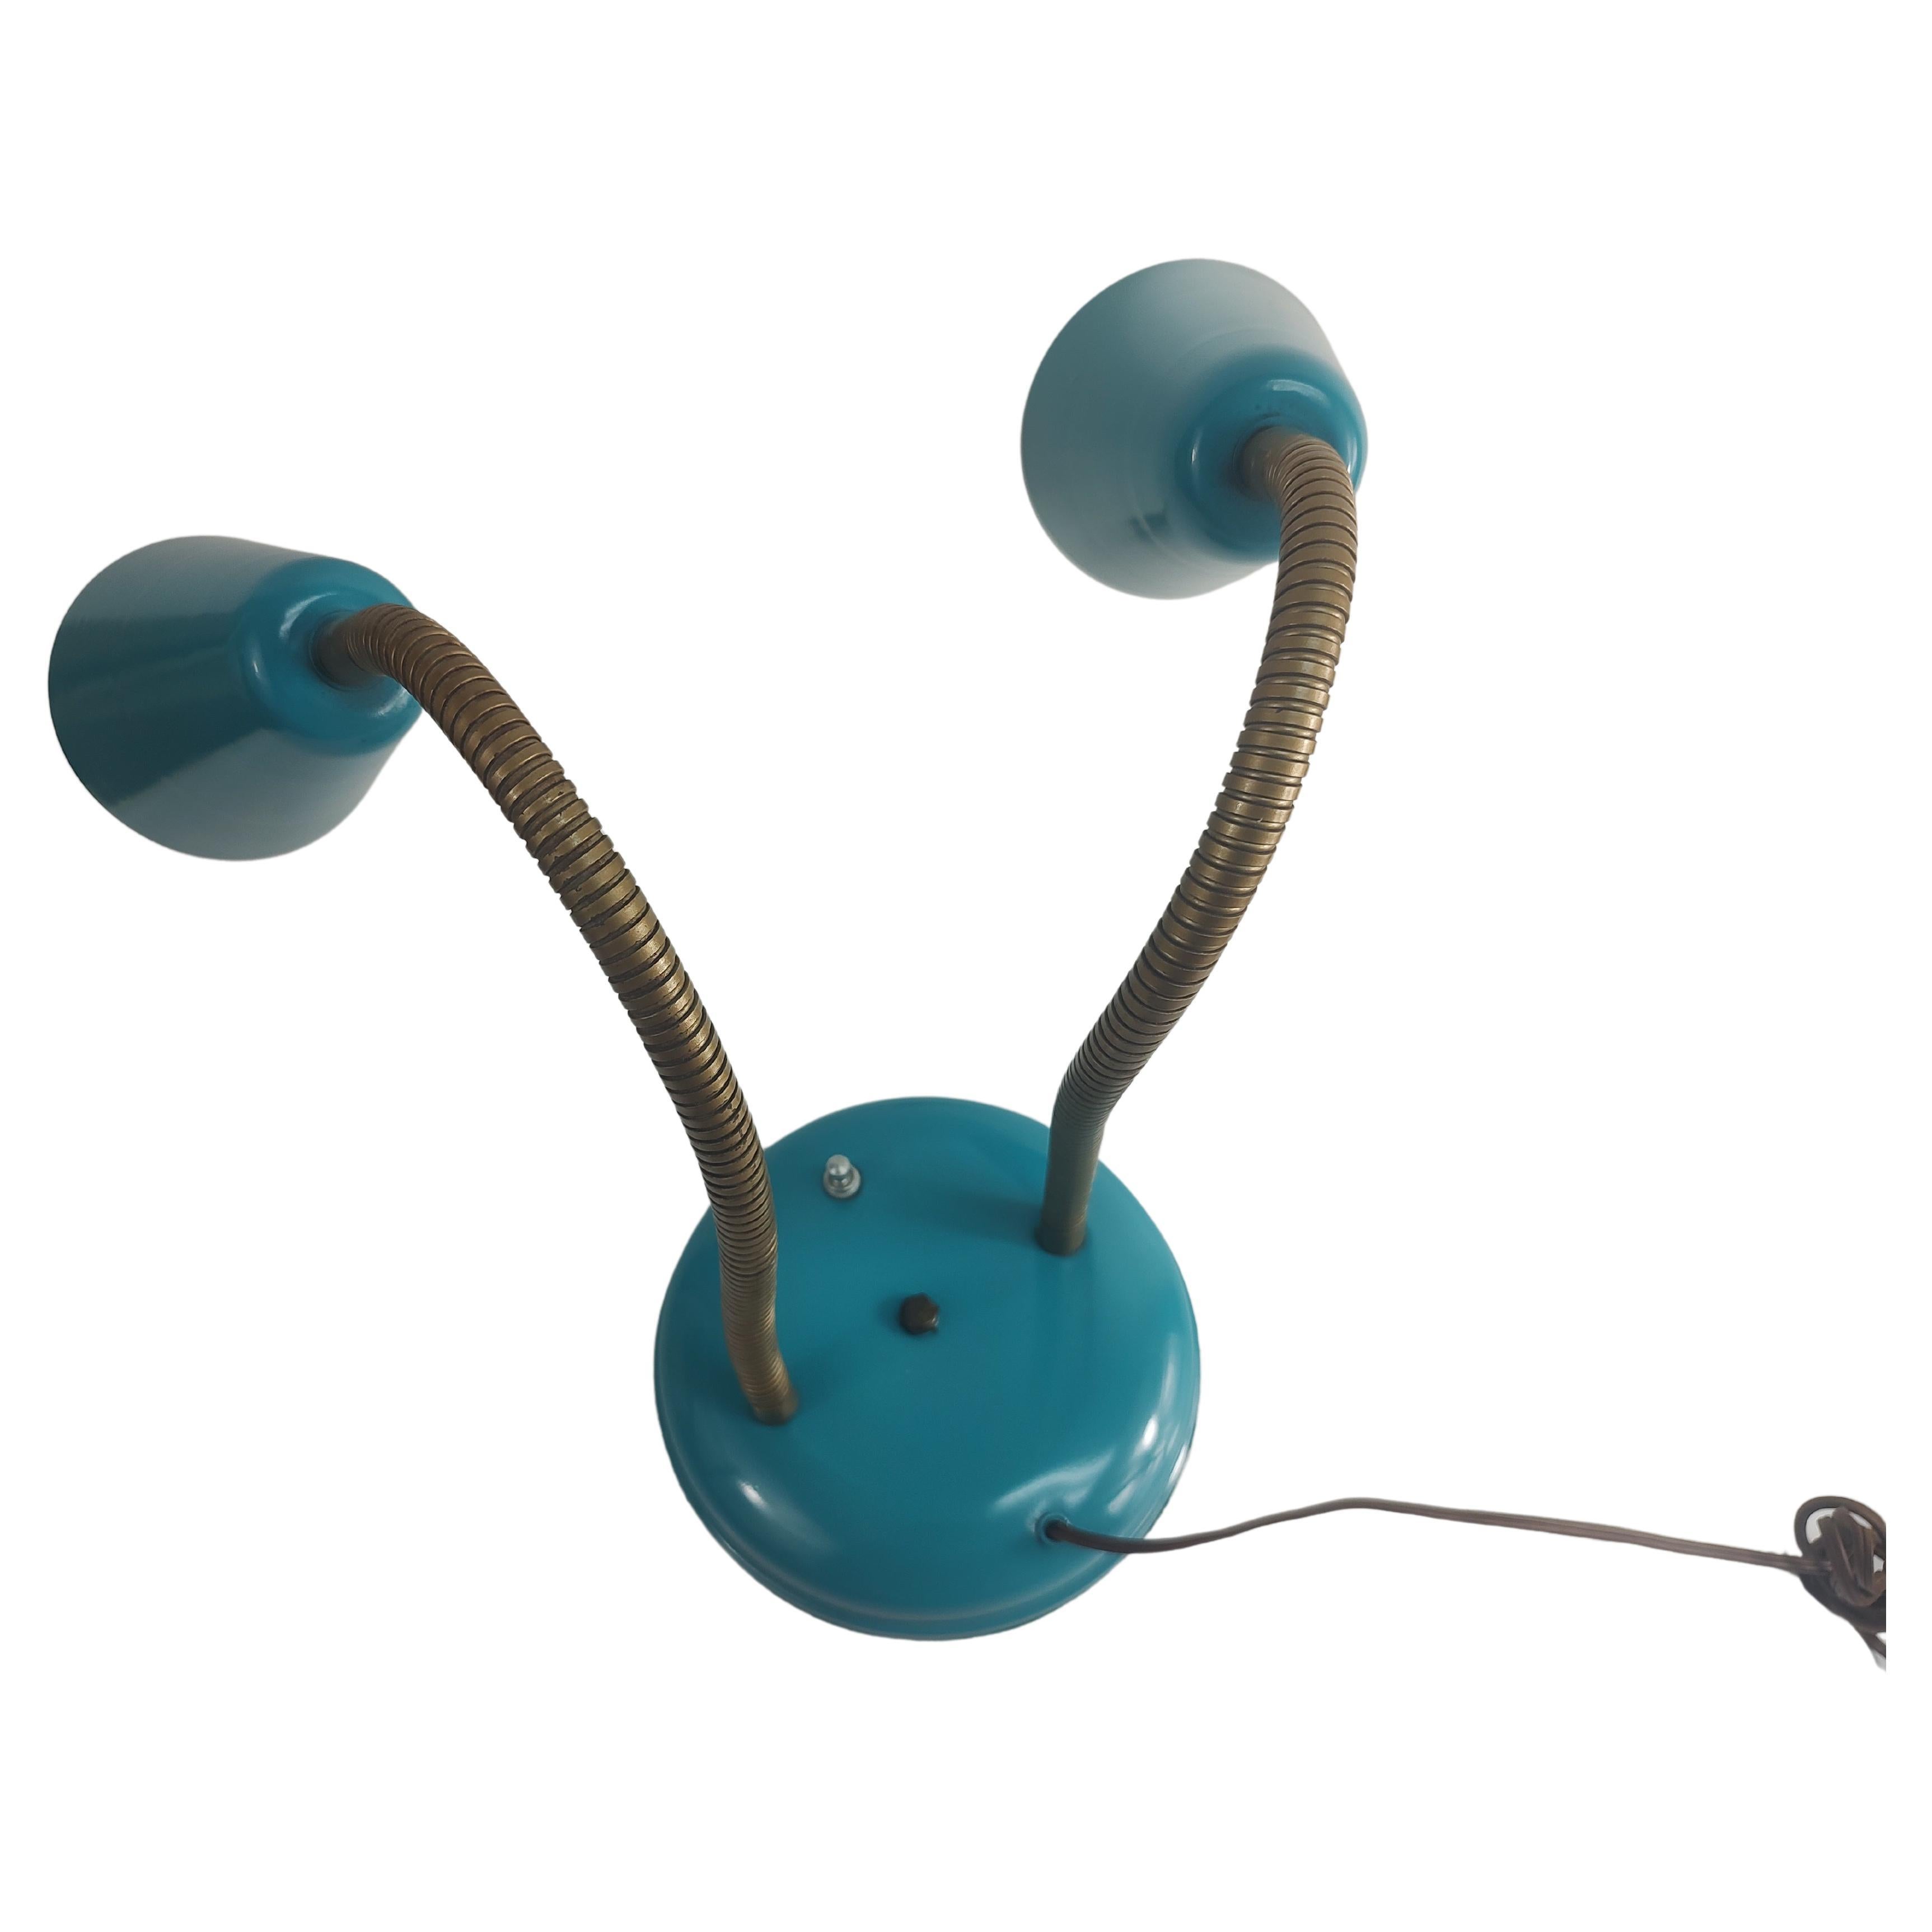 Beautifully restored gooseneck lamp in turquoise. Sound wiring with a stable base, 3-way switch. Very cool style. 